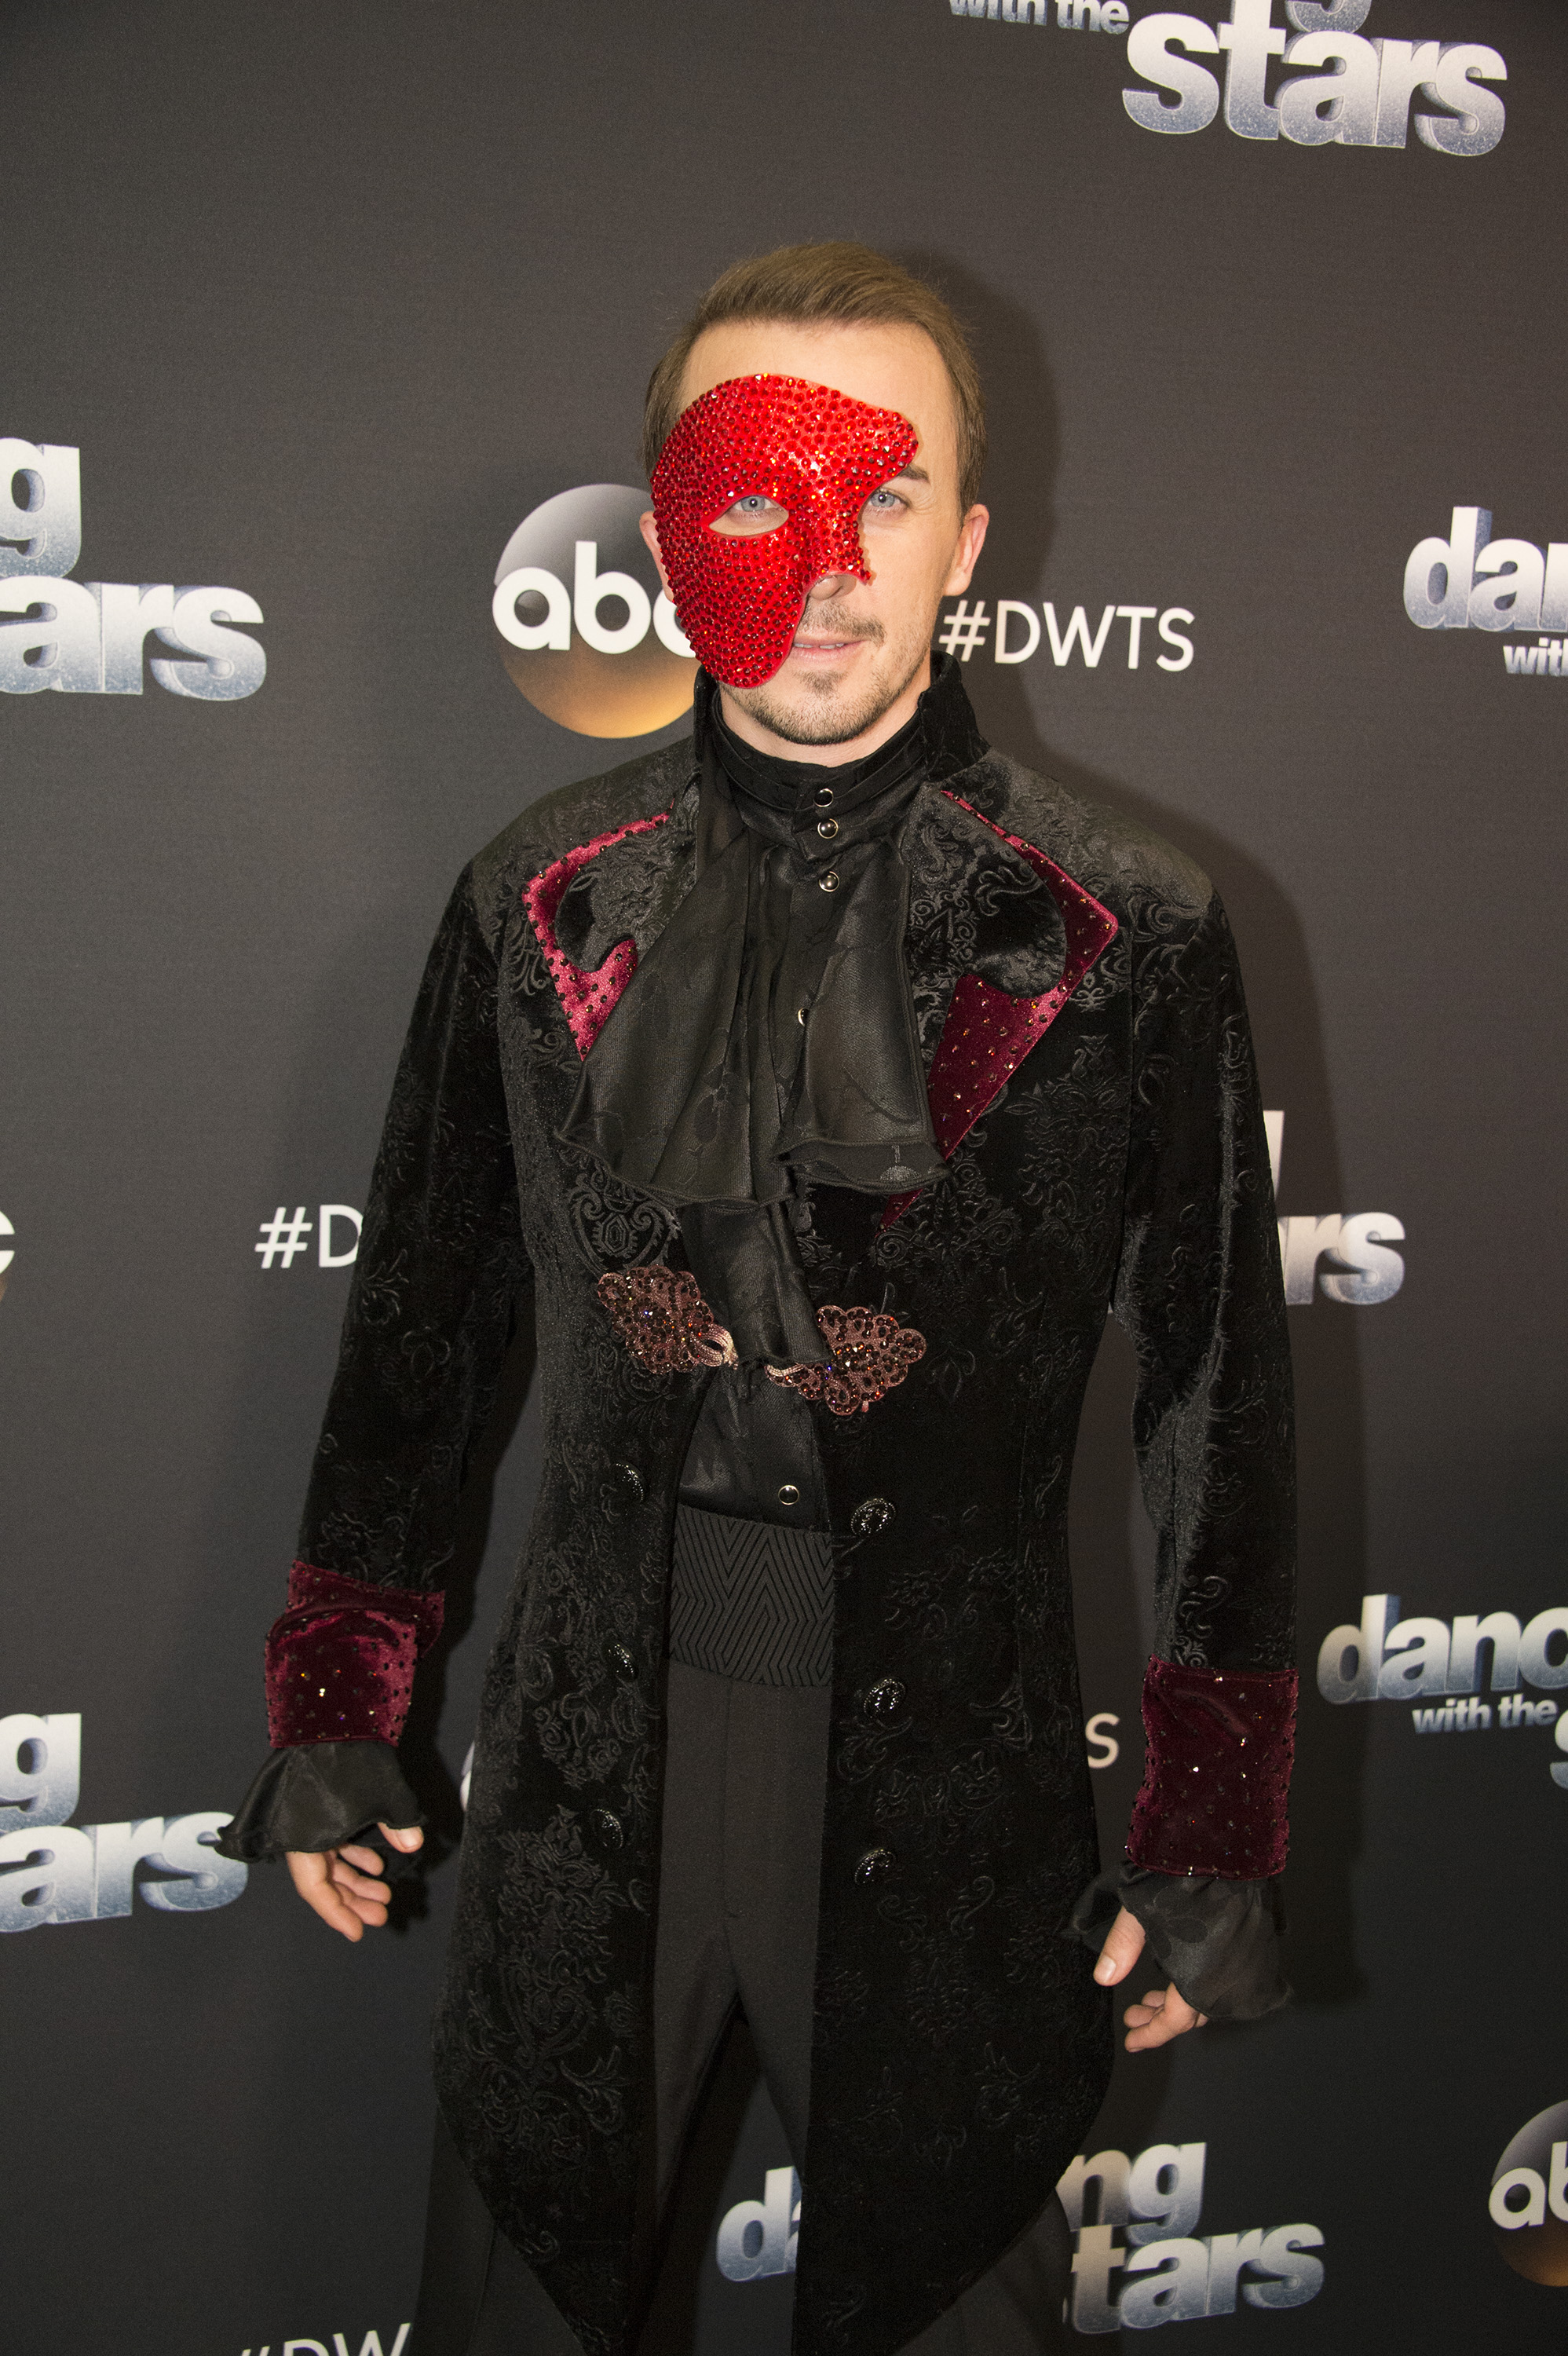 Frankie Muniz during season 25 of "Dancing With the Stars" on Halloween Night on October 30, 2017 in Los Angeles, California | Source: Getty Images